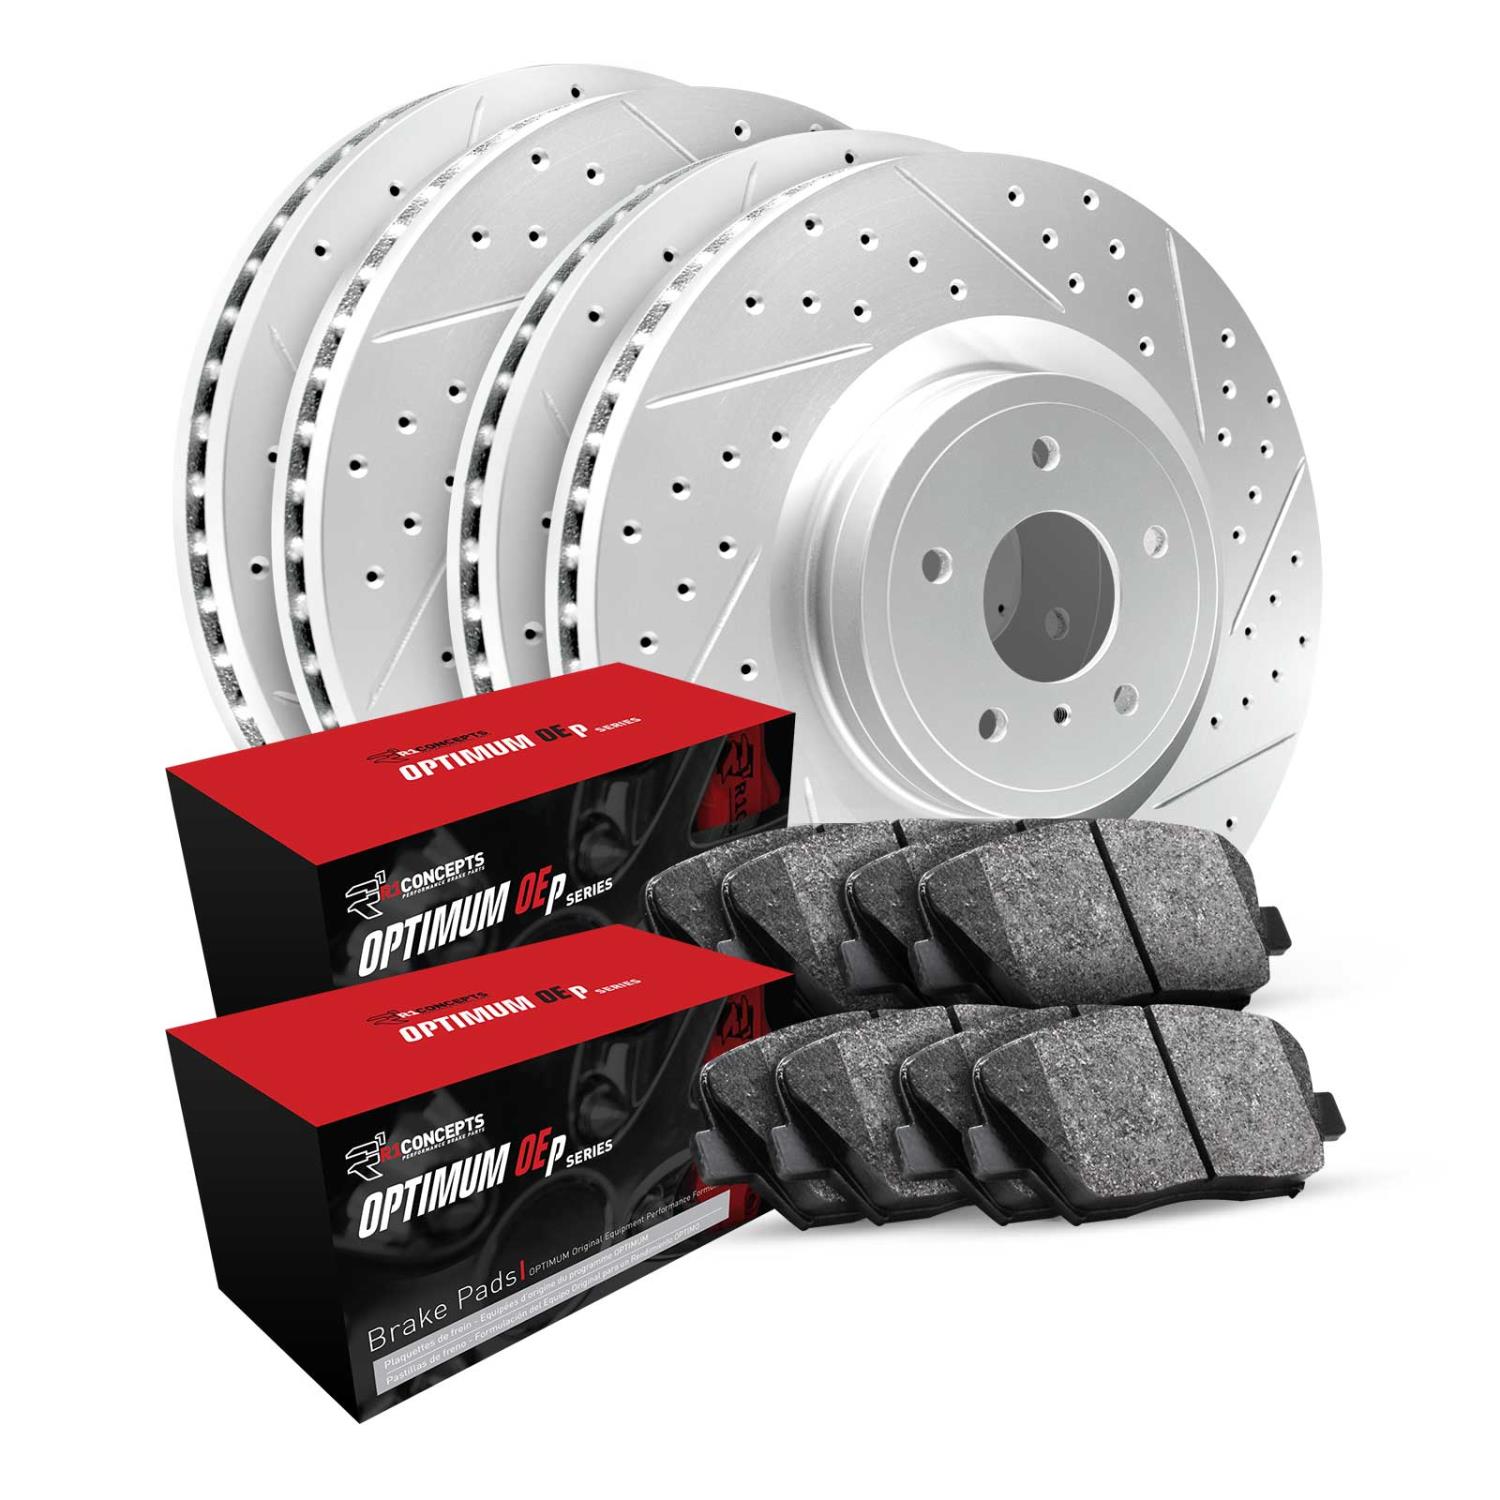 GEO-Carbon Drilled & Slotted Brake Rotor & Drum Set w/Optimum OE Pads & Shoes, 2013-2021 Fits Multiple Makes/Models